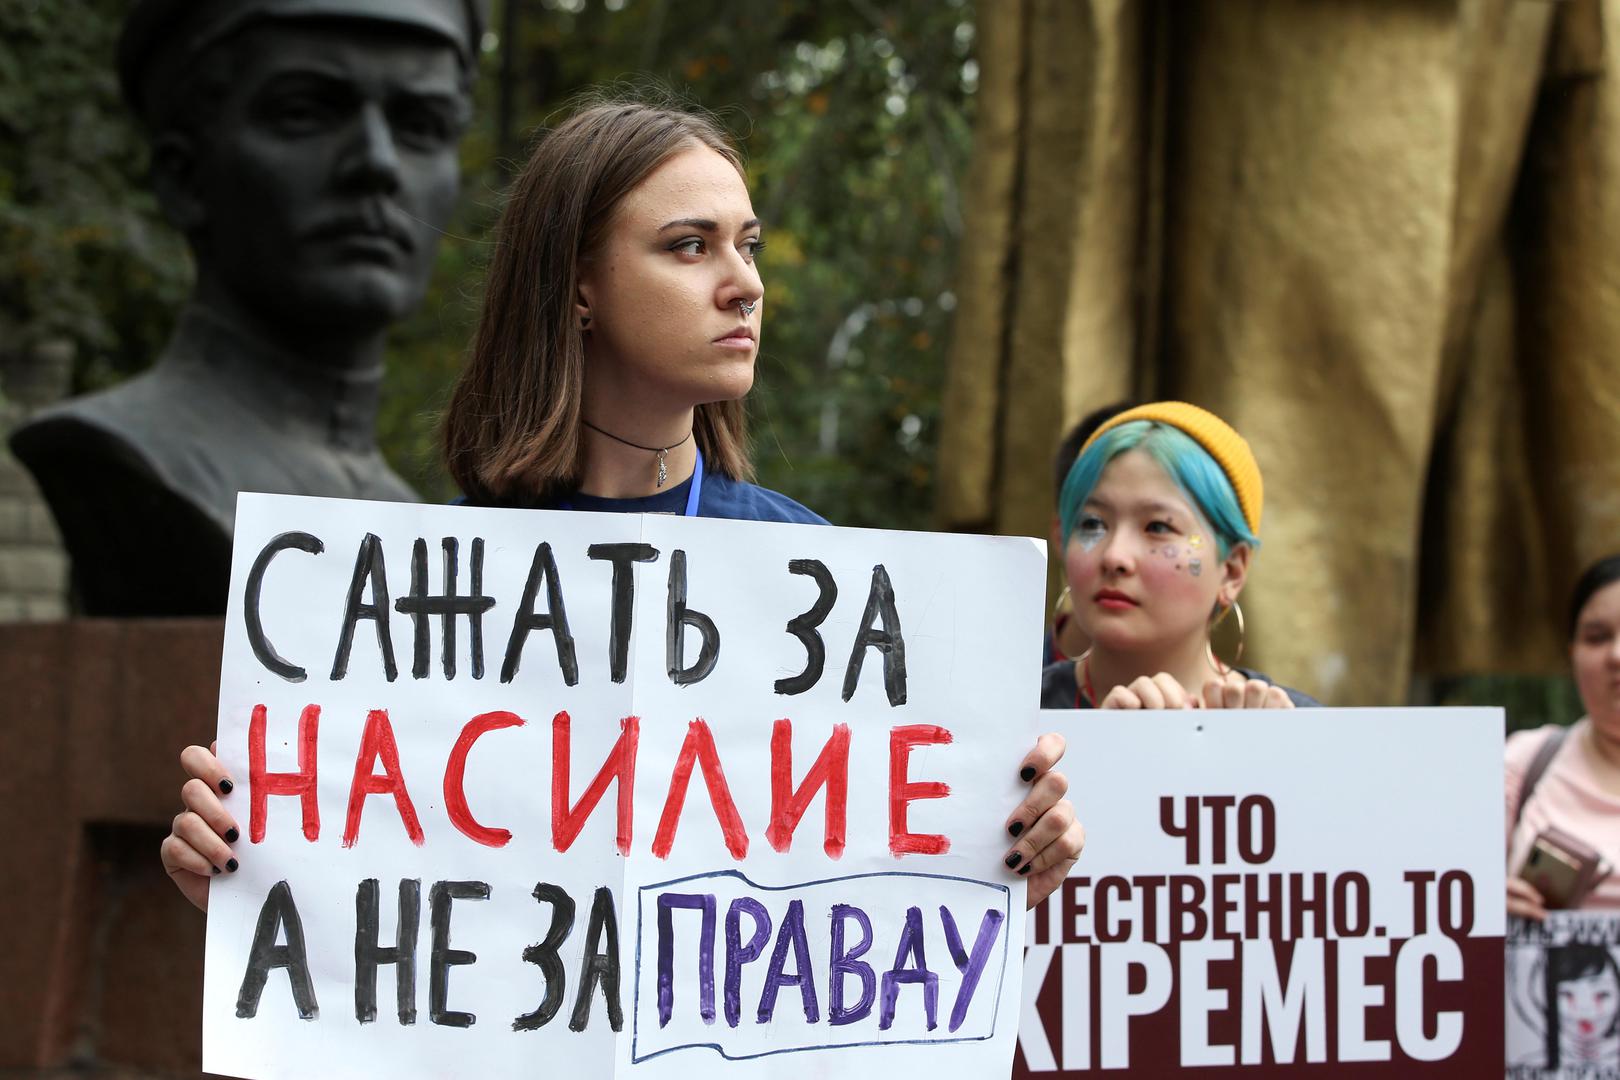 Participants protest against discrimination and gender-based violence during a rally held by members of feminist organizations and social activists in Almaty, Kazakhstan.